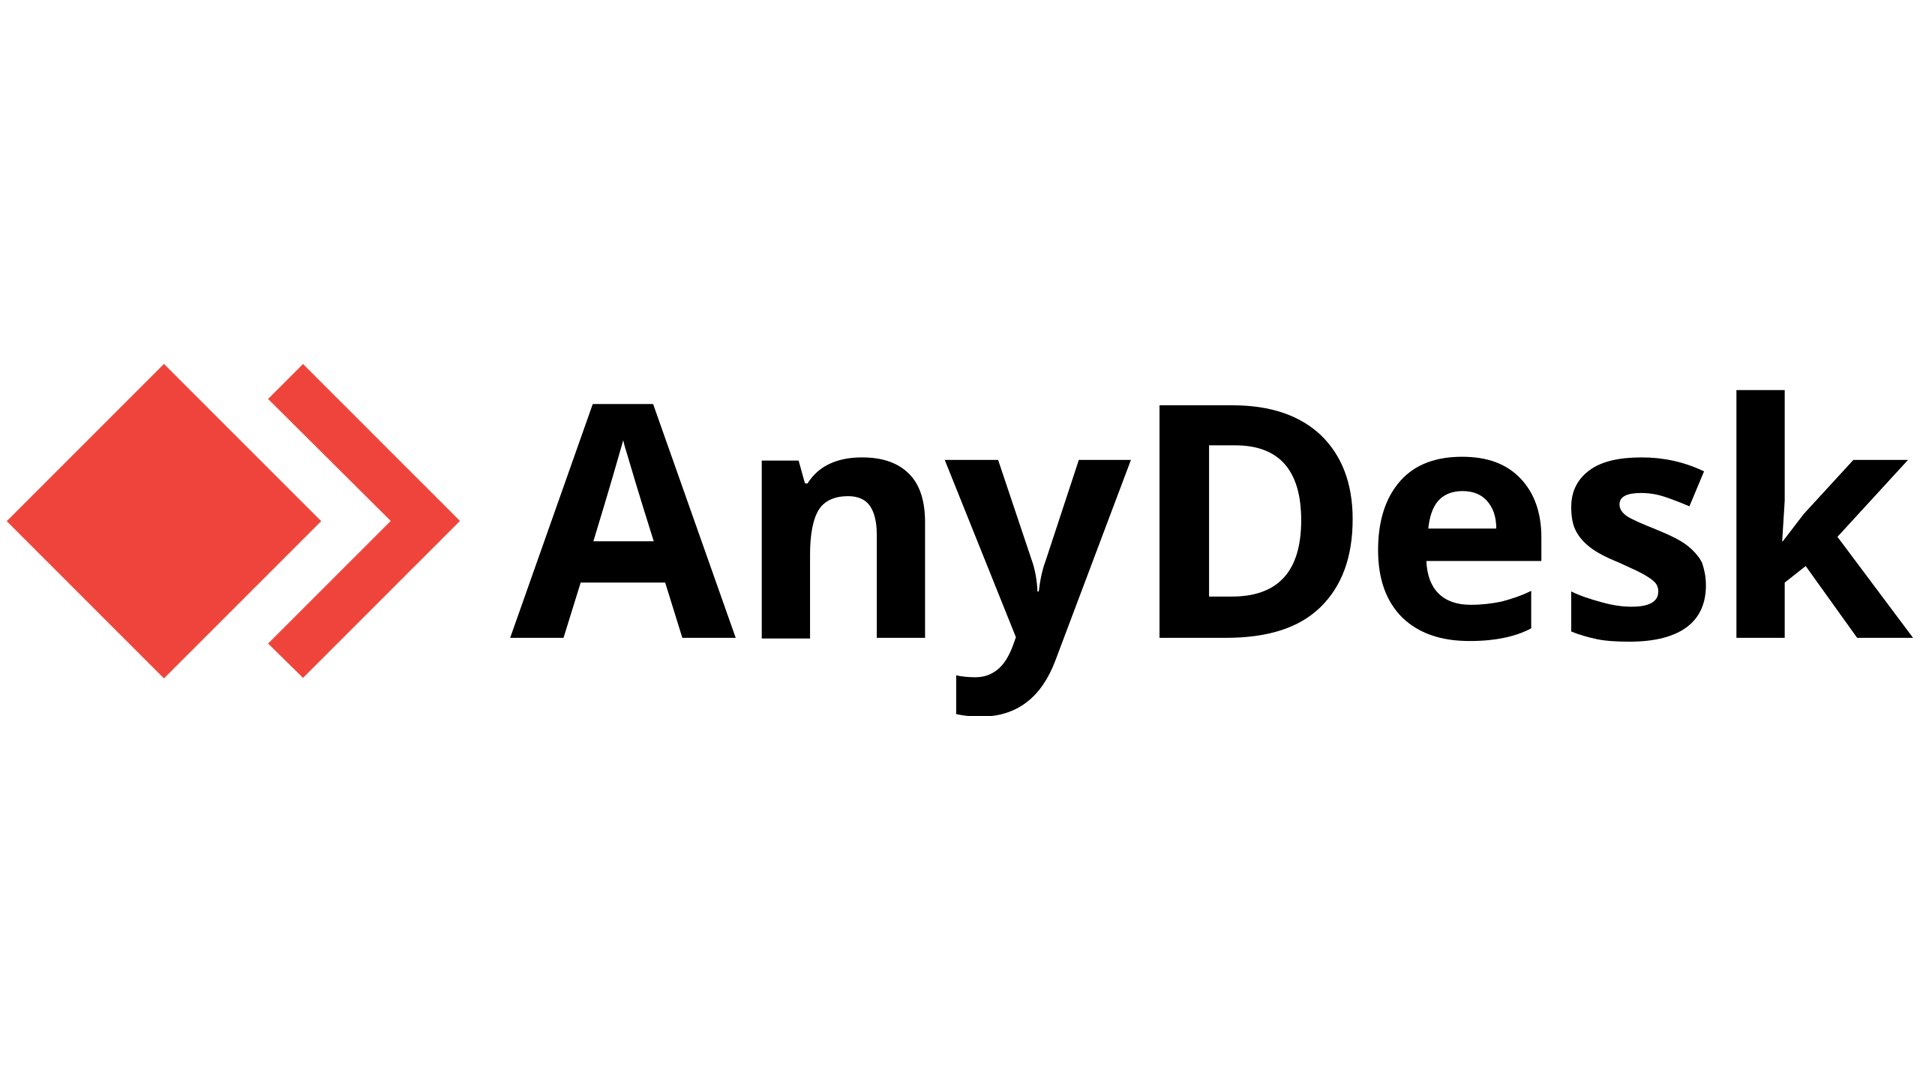 Overview and Review of AnyDesk